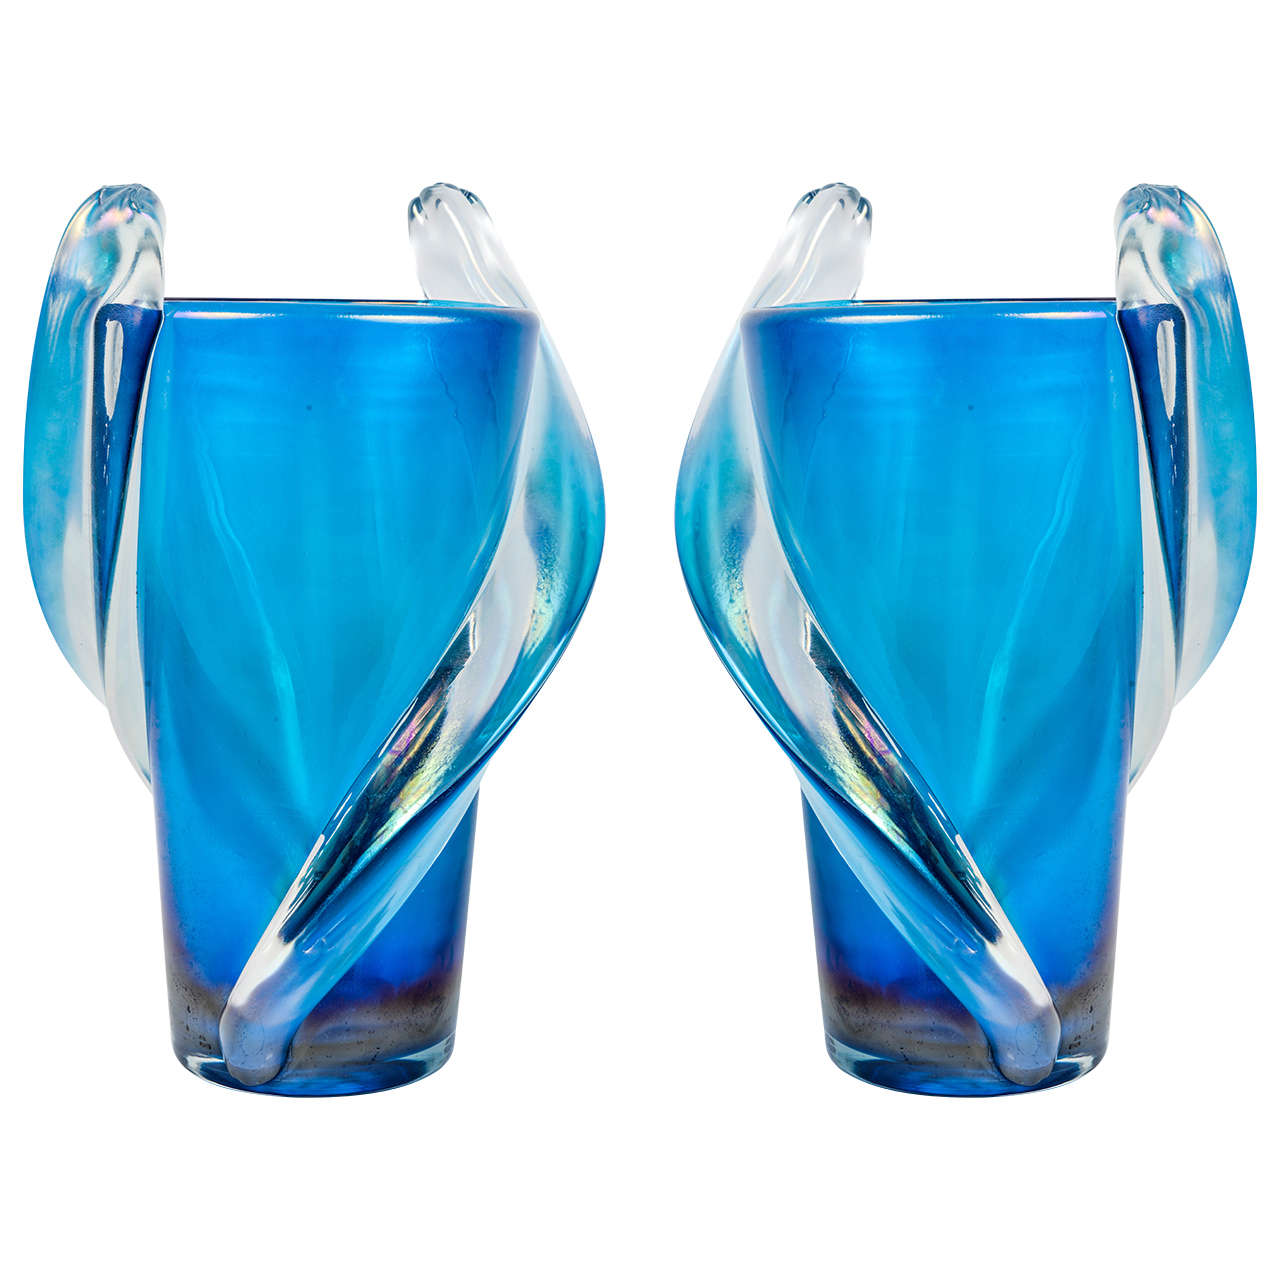 Gorgeous Pair of Vases in Murano Glass Signed by G. Ferro